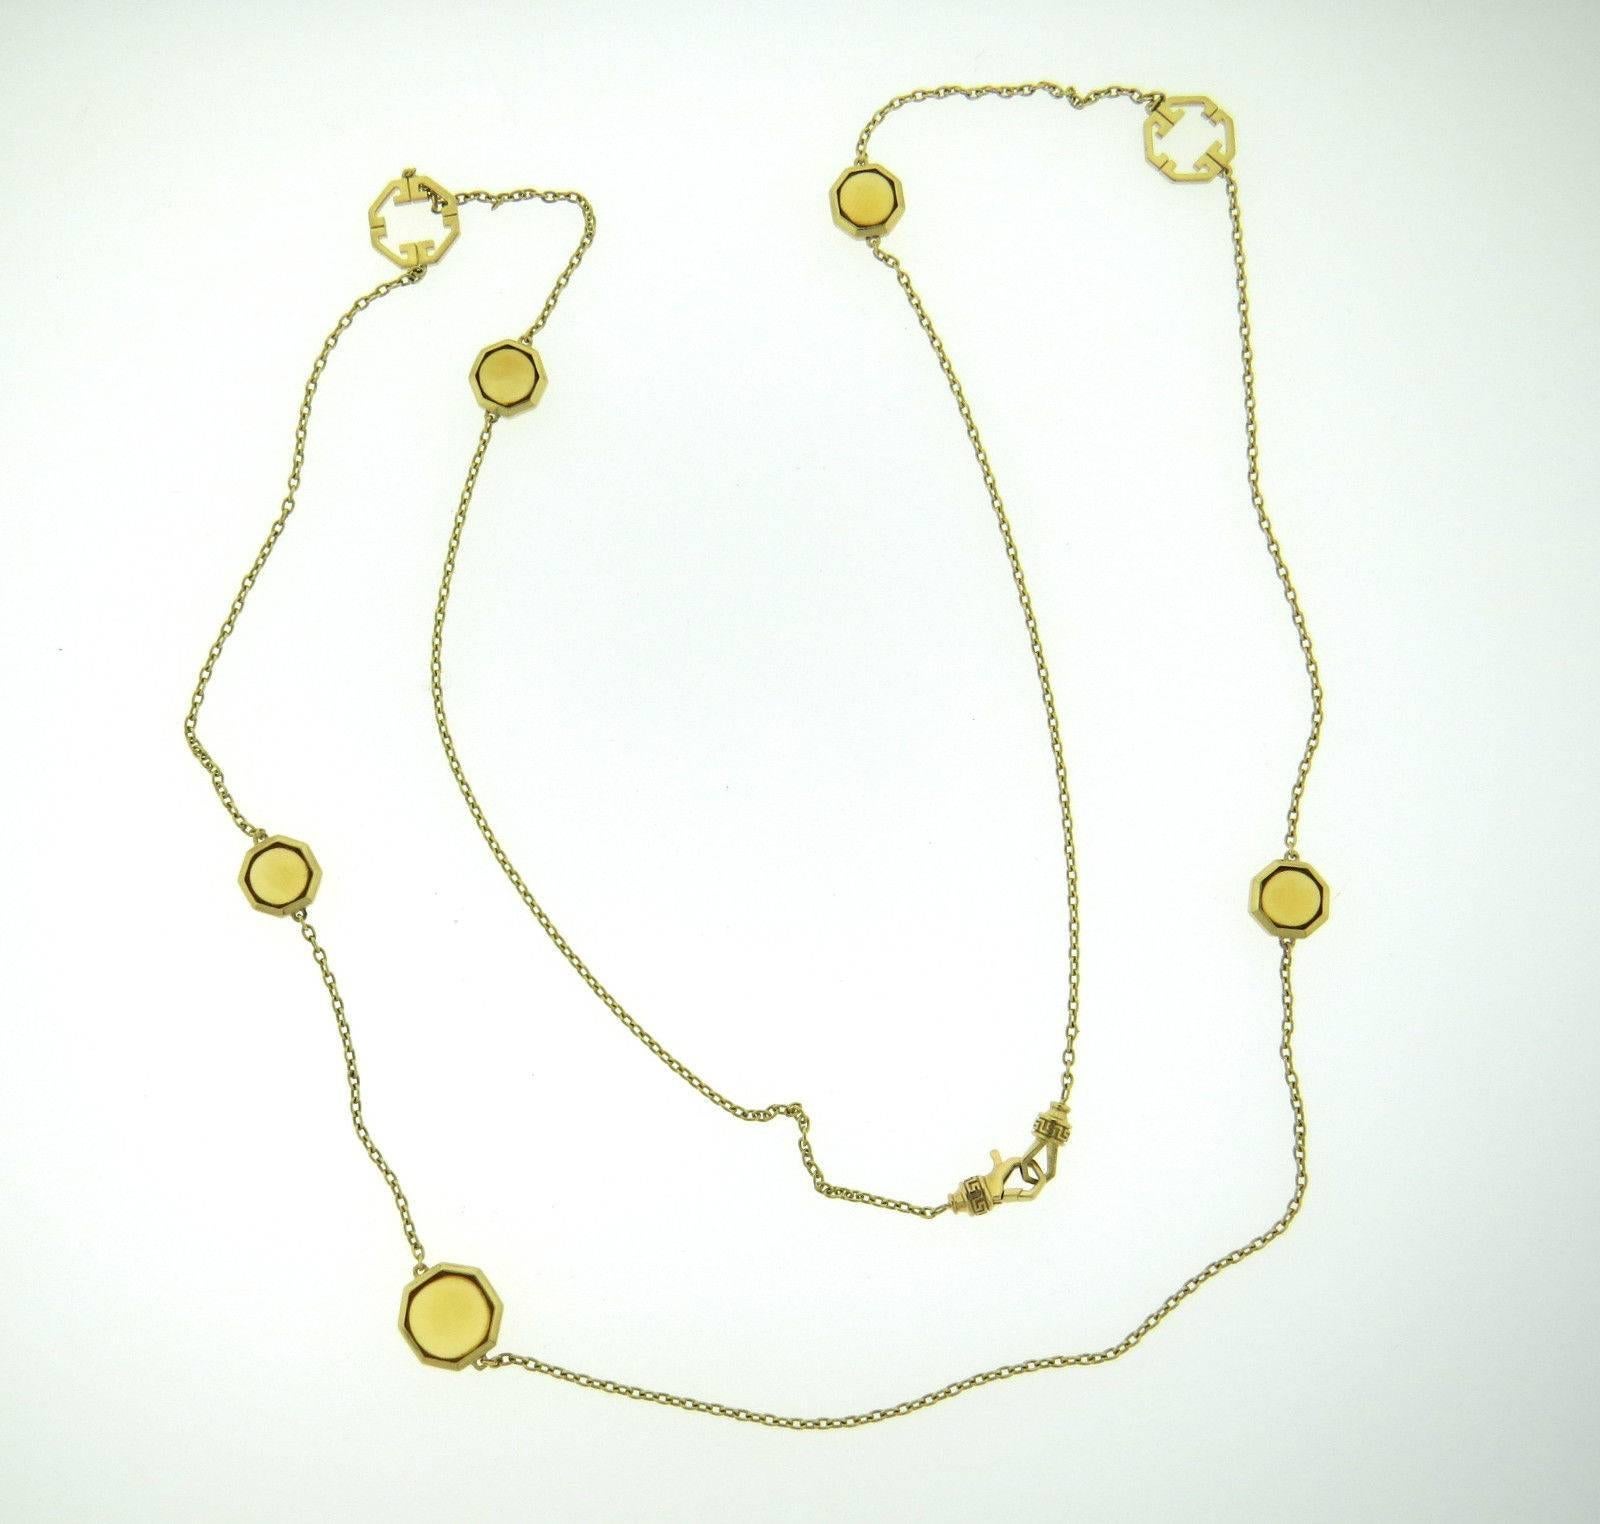 An 18k yellow gold necklace set with citrines.  The necklace is 36 1/4